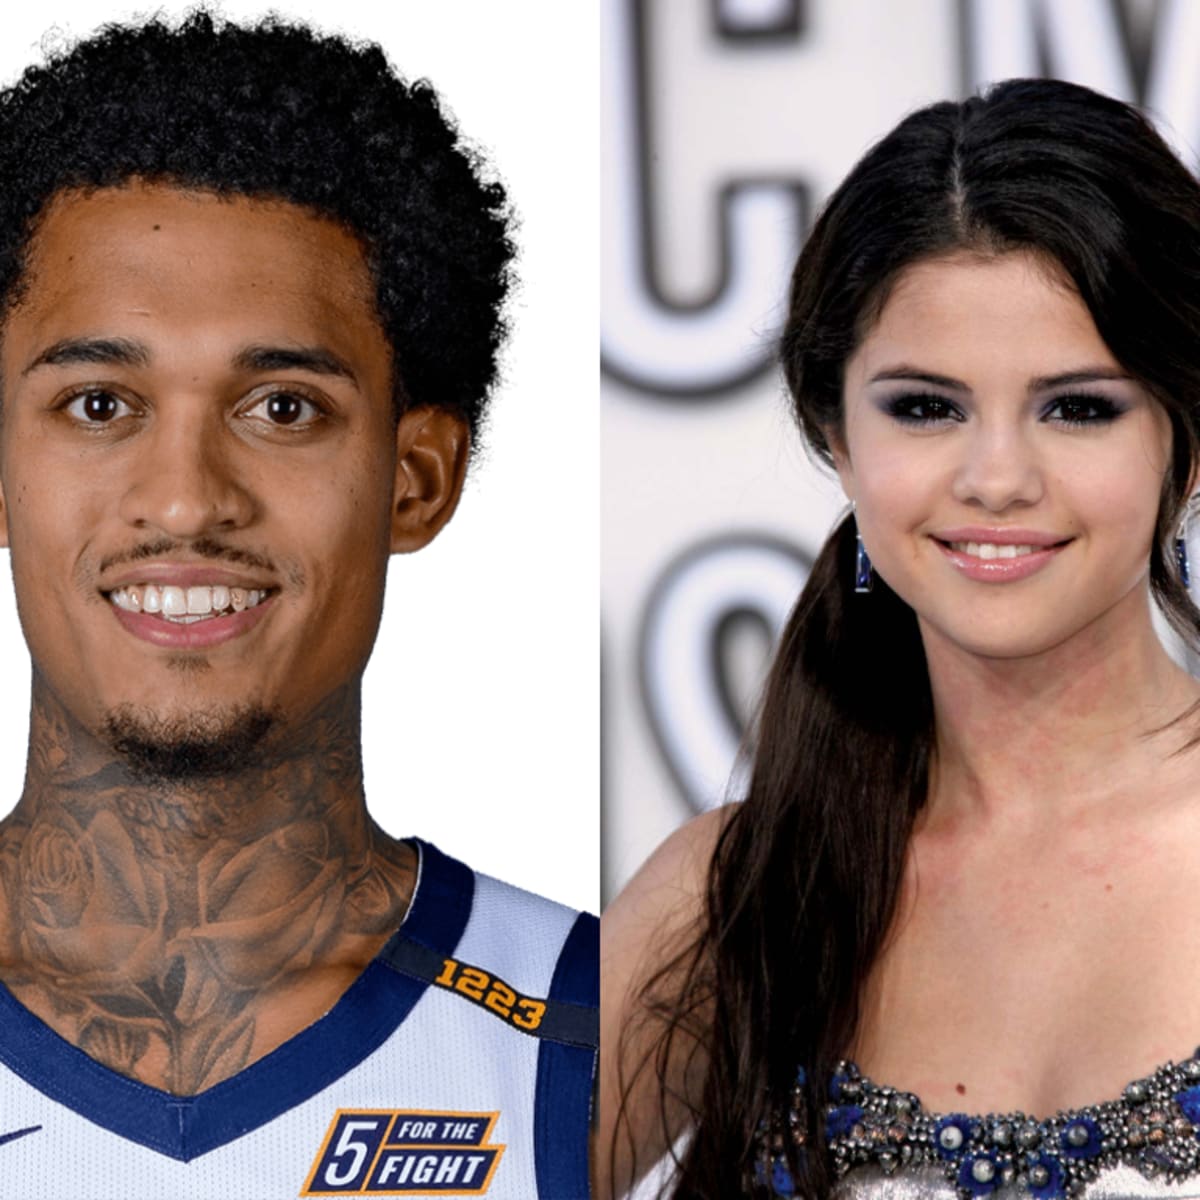 Jordan Clarkson Shoots His Shot With Selena Gomez: "This Dated Kendal Jenner, Bella Hadid And Is Going For The Three-Peat. A Scorer." - Fadeaway World